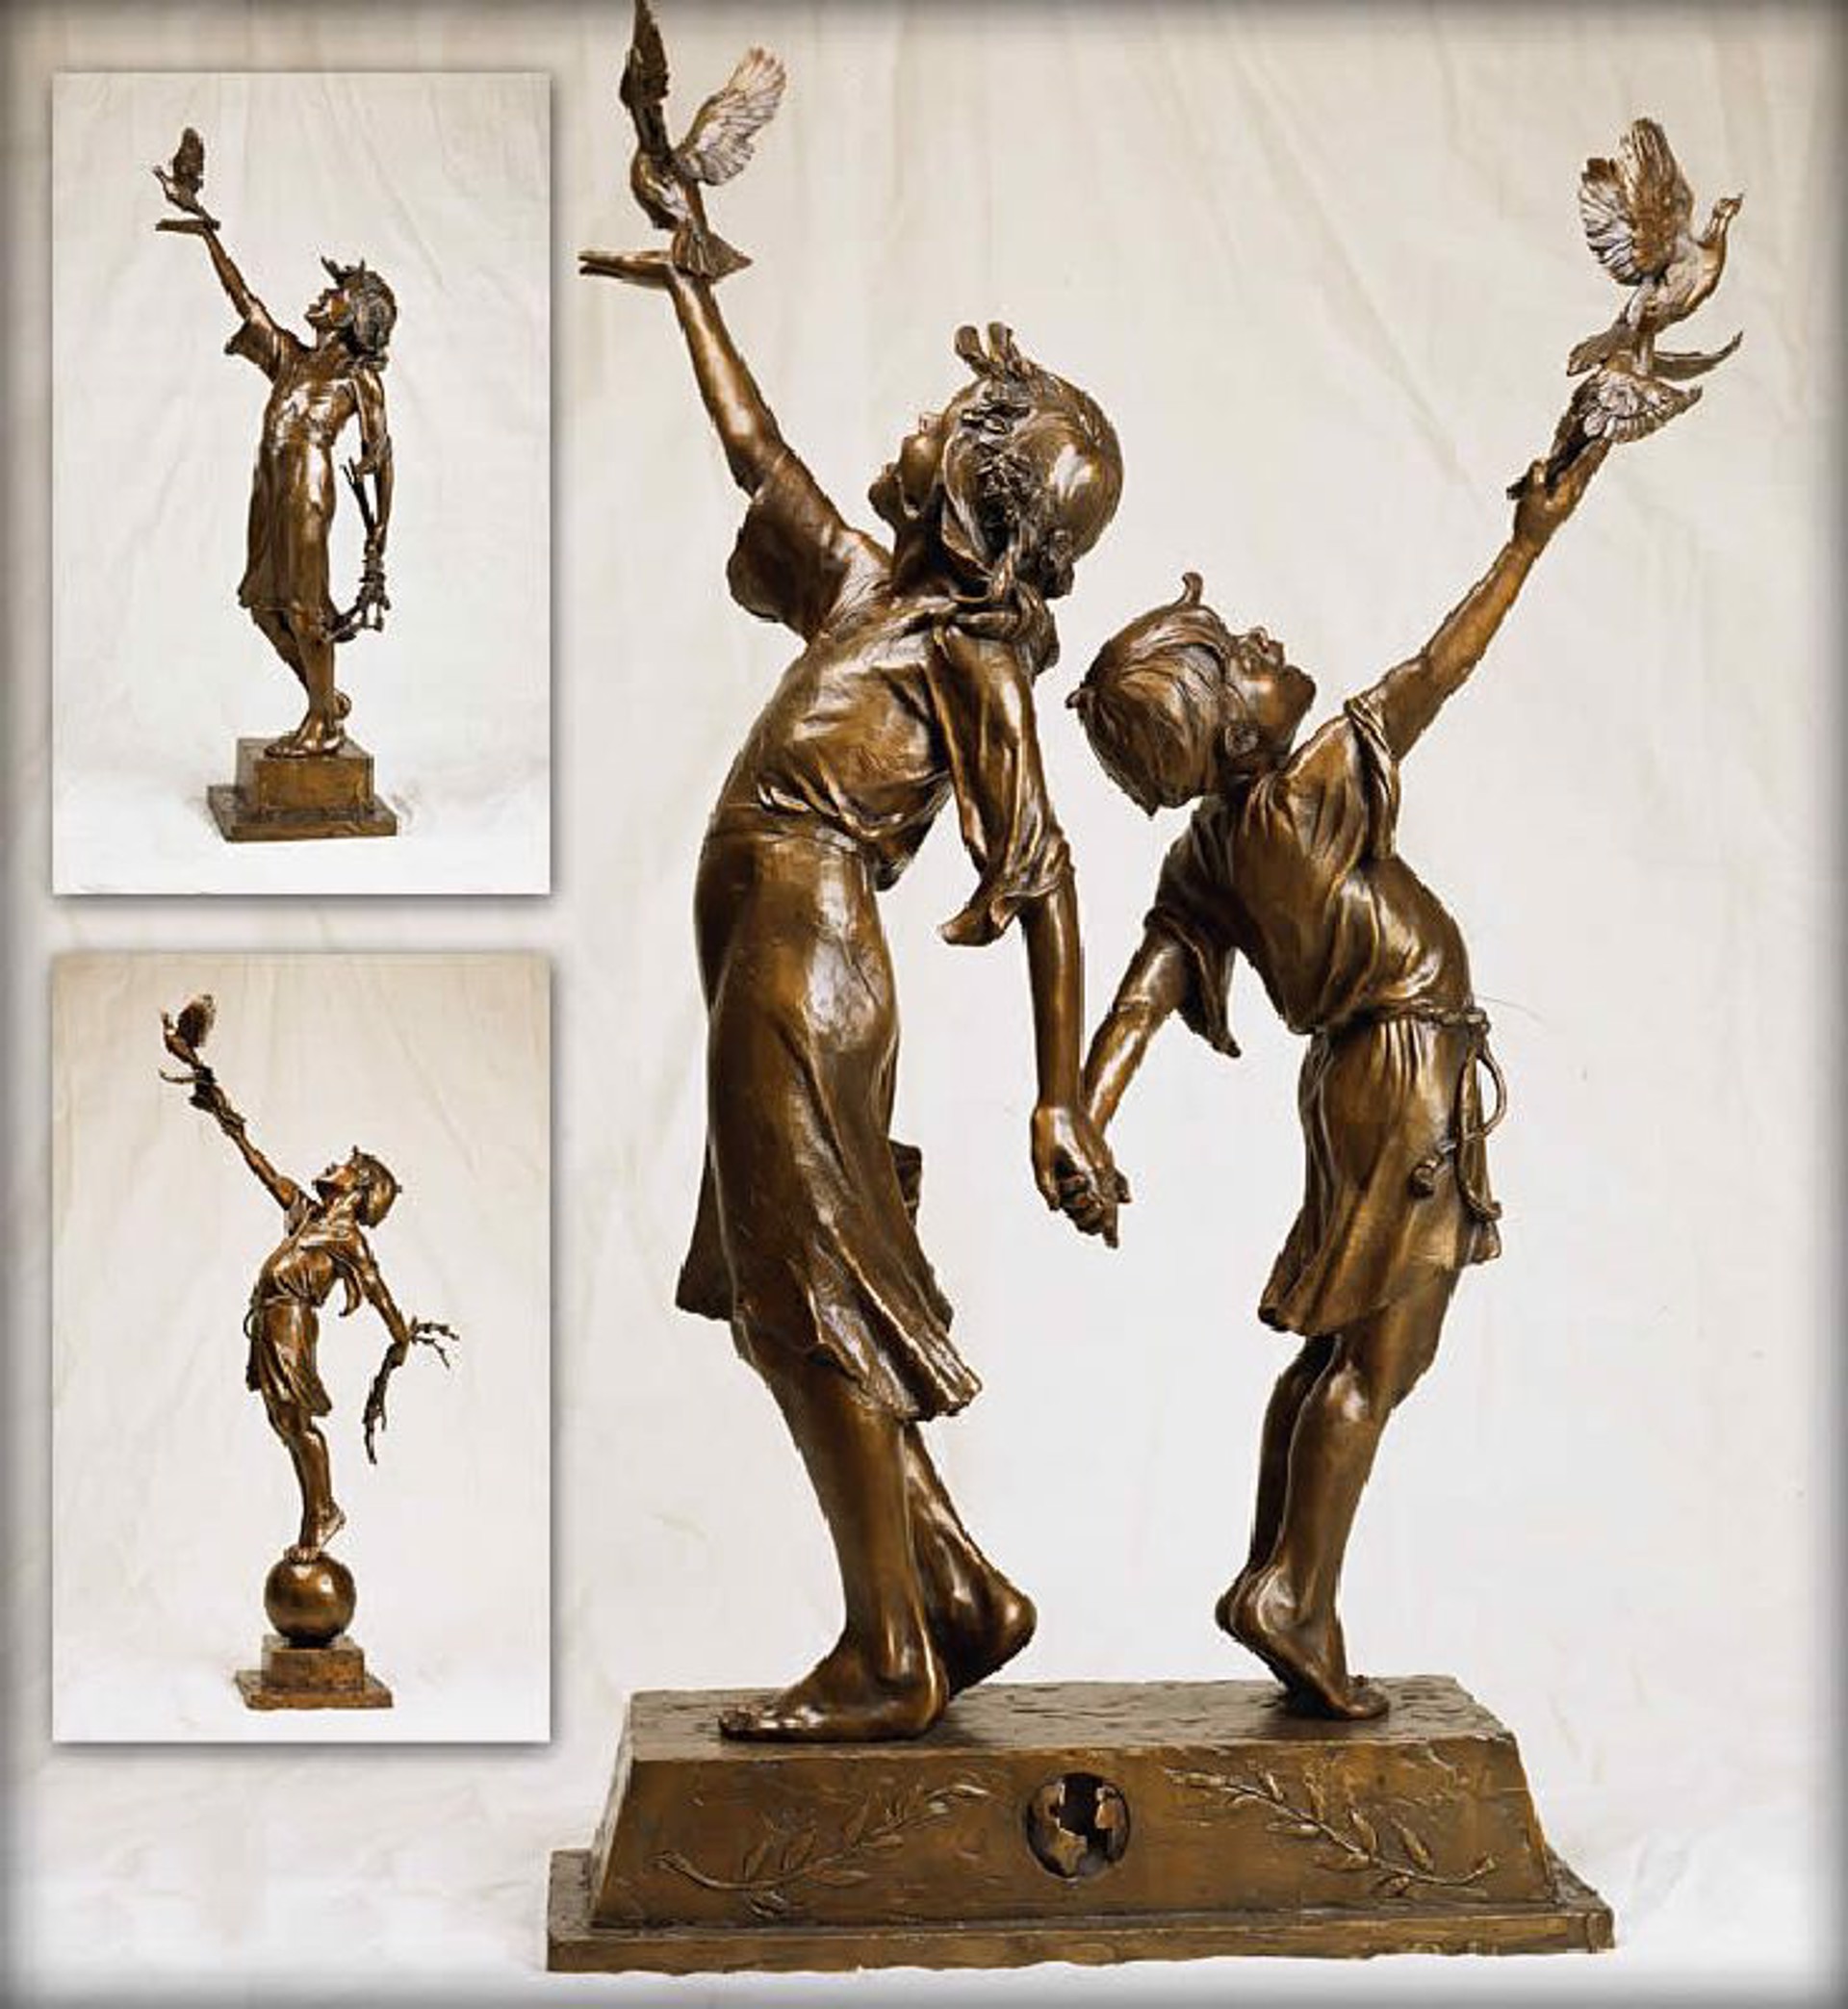 Children of Peace by Gary Lee Price (sculptor)